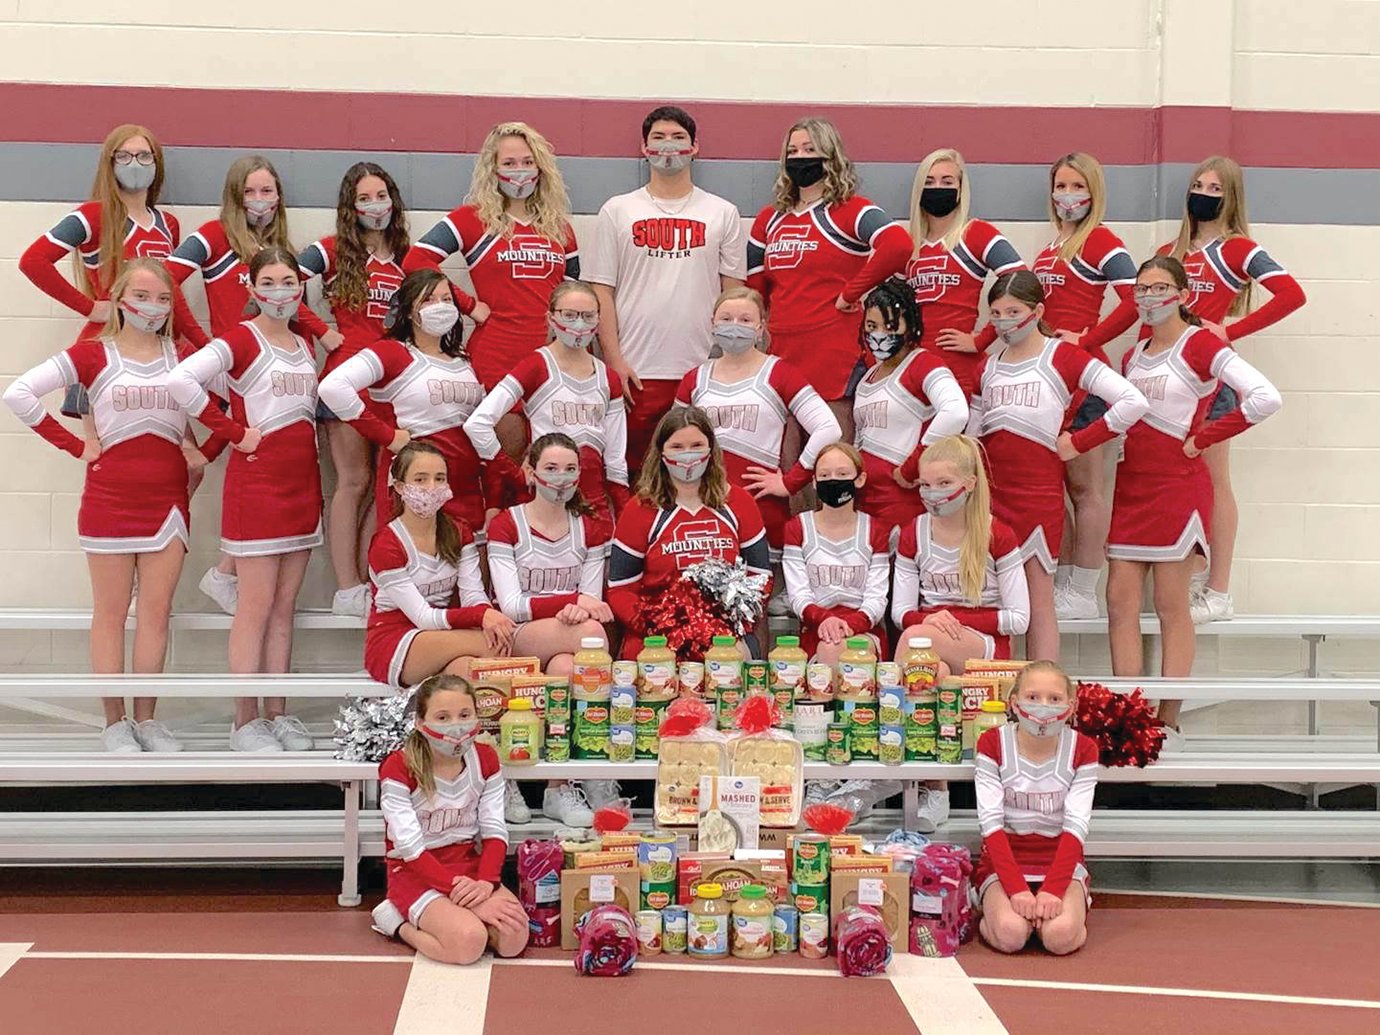 The Southmont cheerleading squad poses for a photo ahead of delivering traditional Thanksgiving meal ingredients to the organizers of the Community Thanksgiving Dinner.